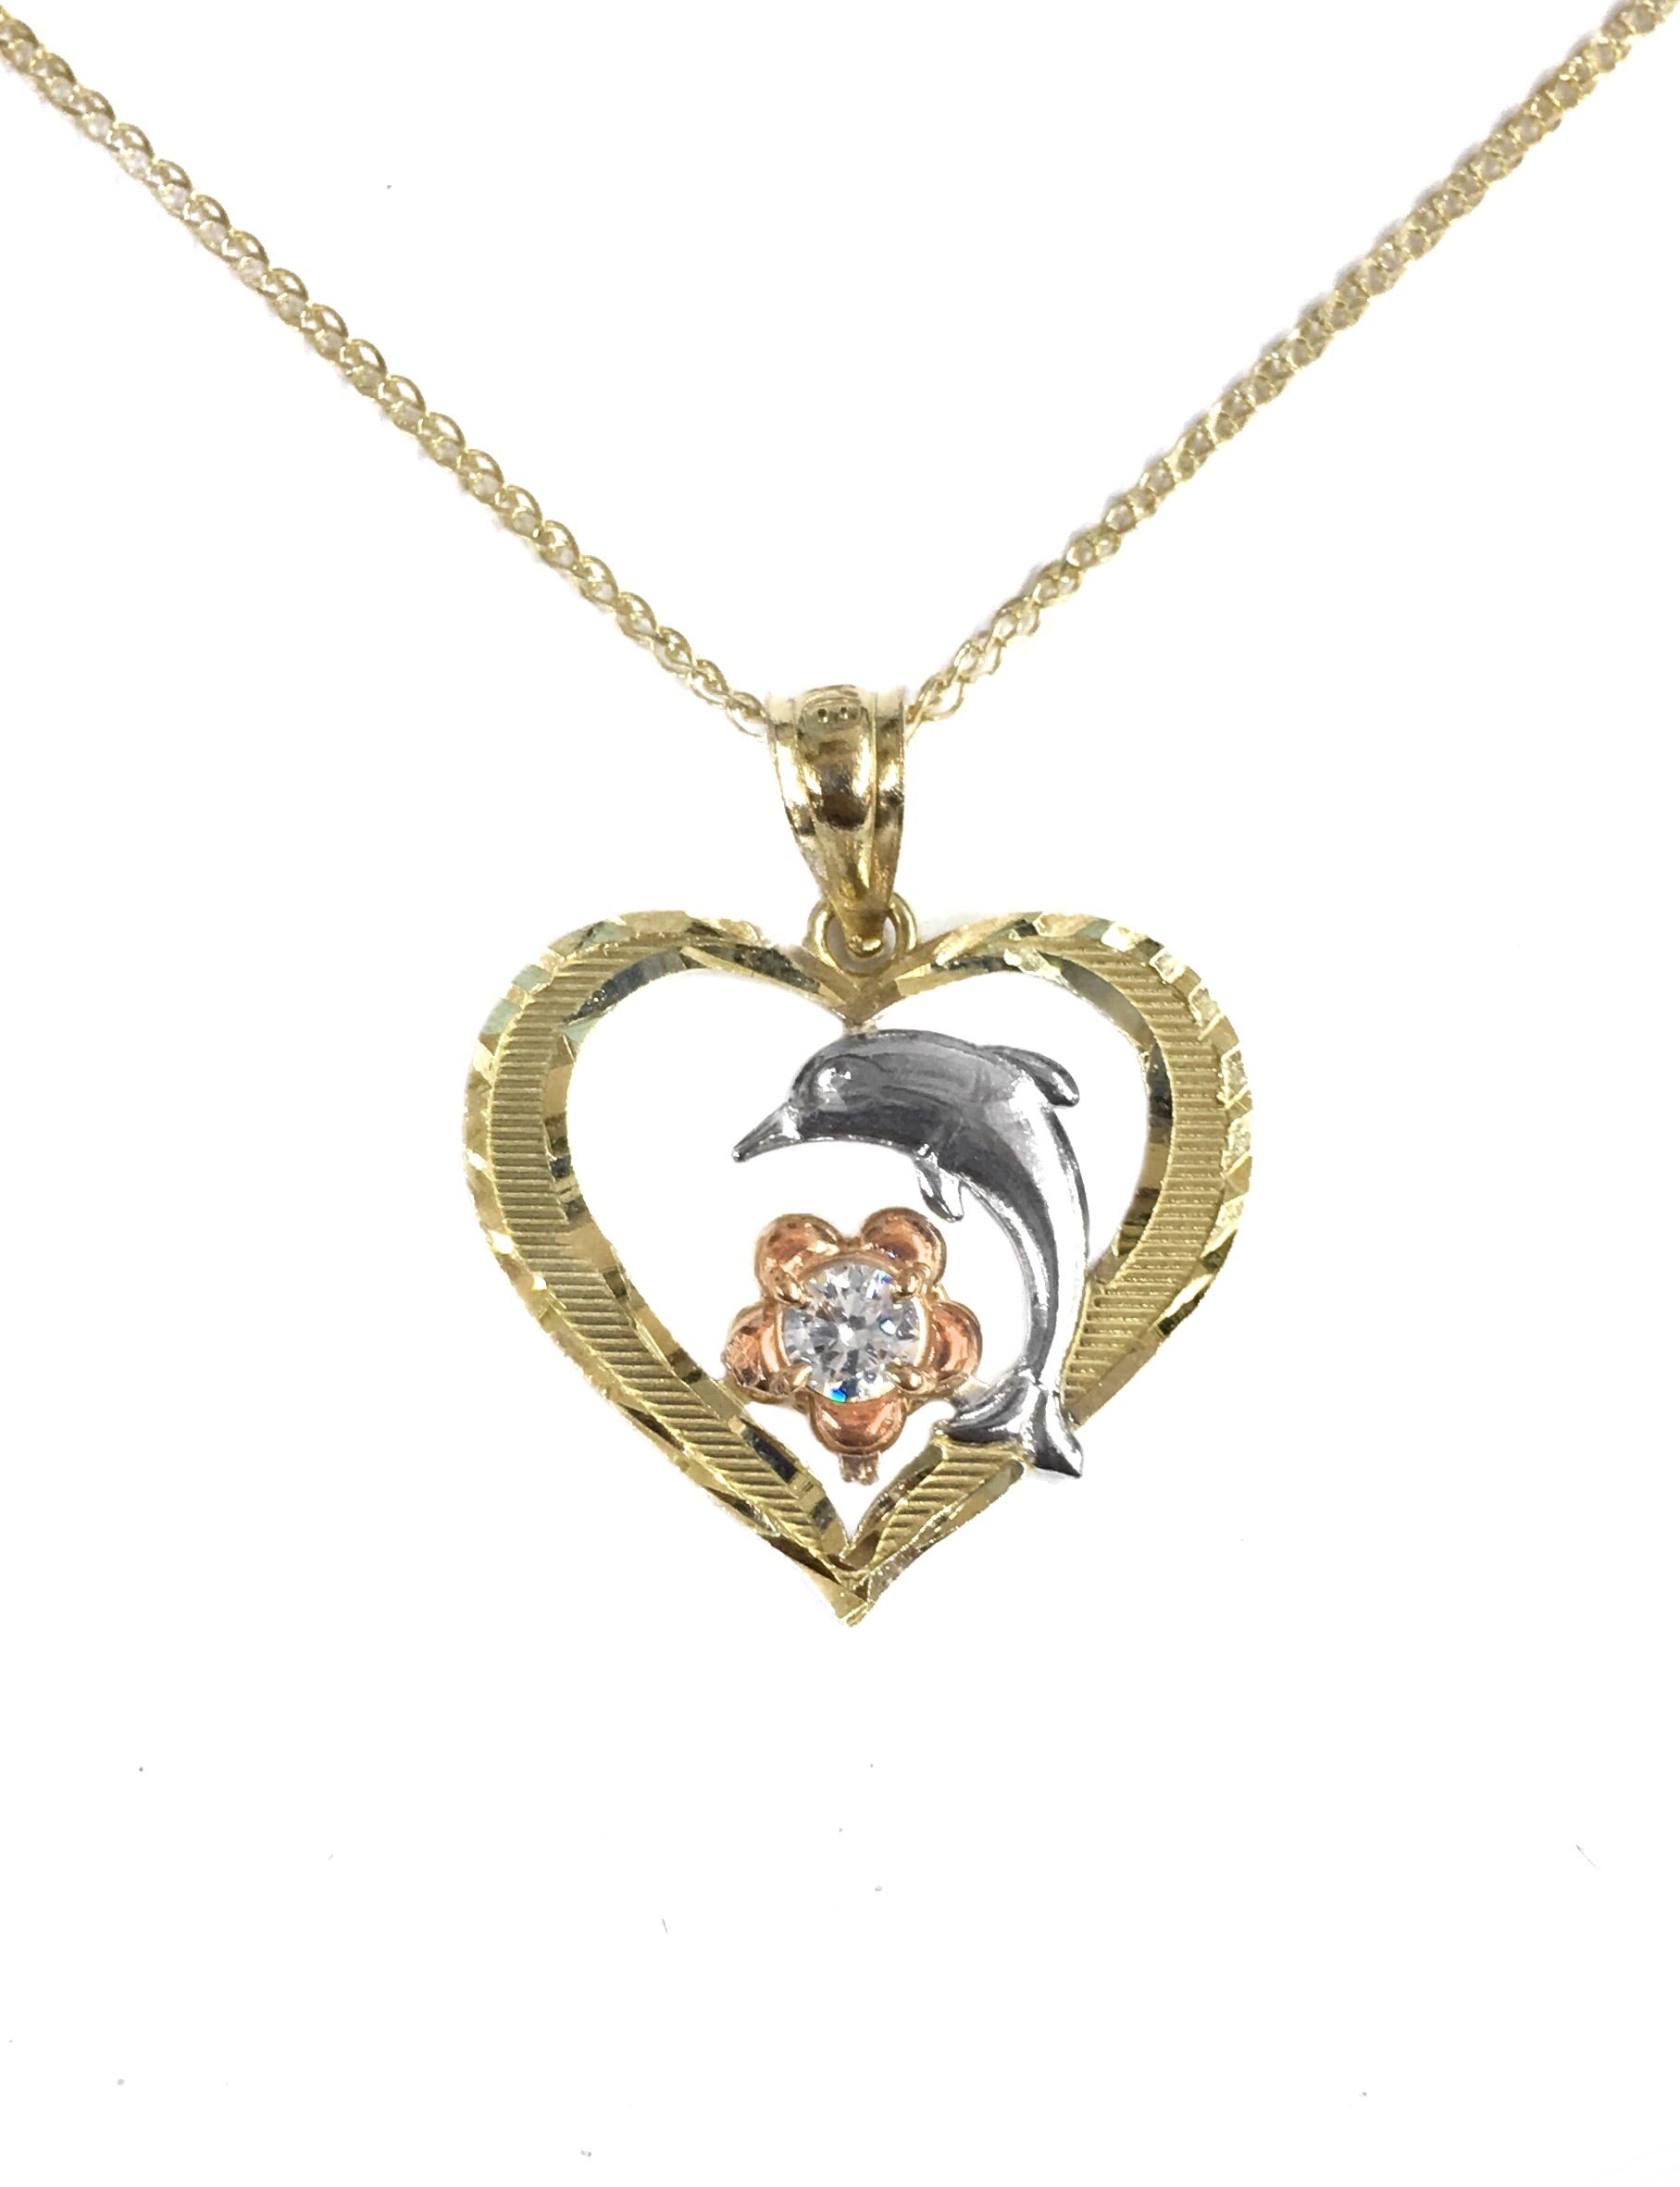 14K TRICOLOR GOLD DOLPHIN HEART NECKLACE -CUBIC ZIRCONIA